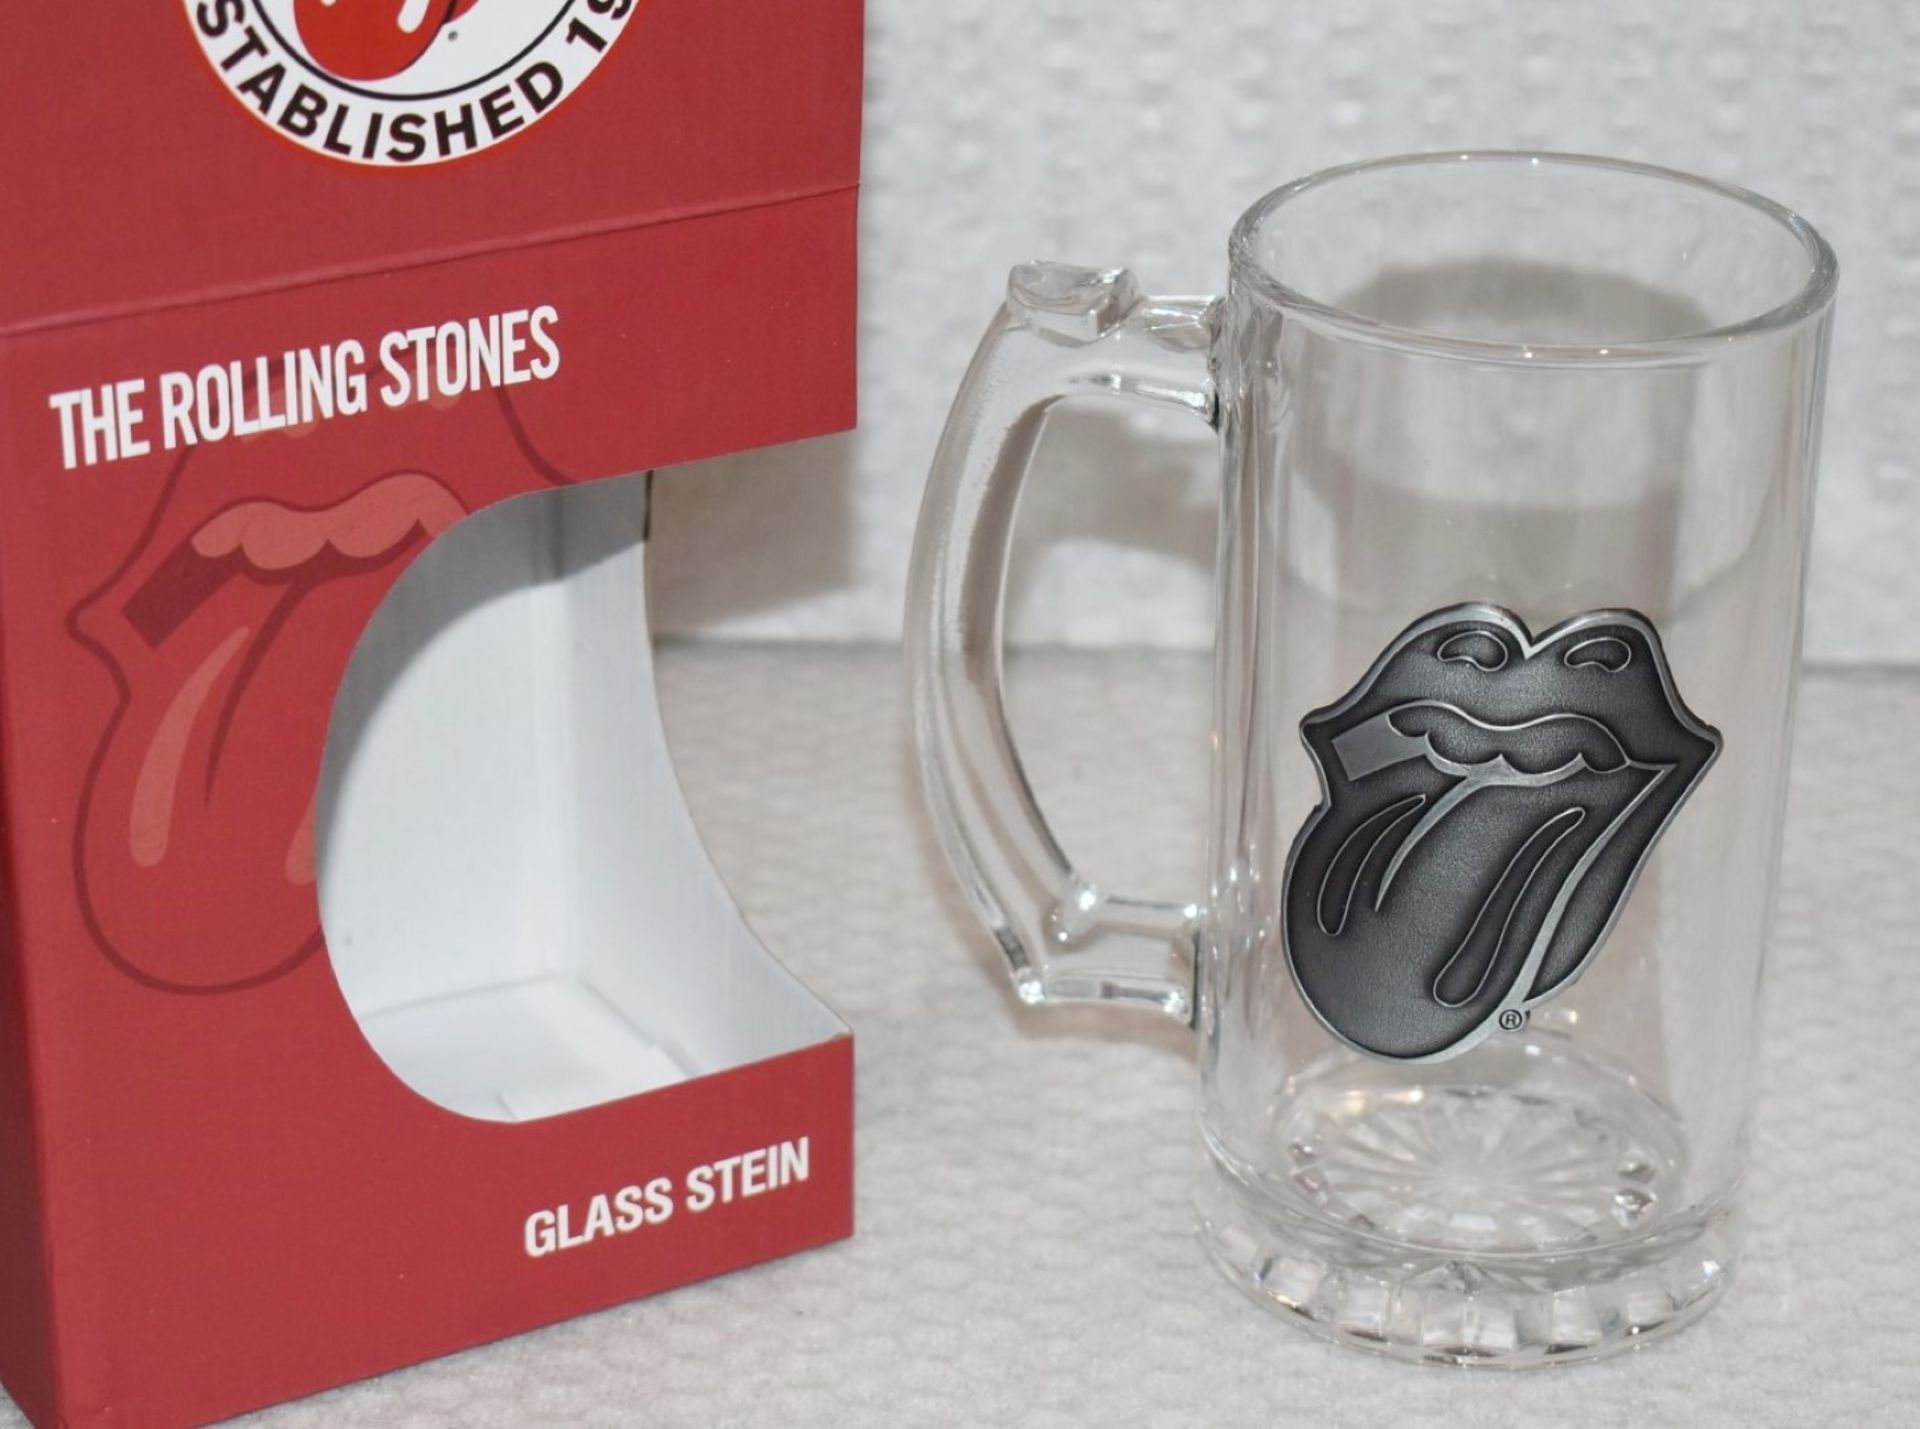 1 x Rolling Stones Half Pint Drinking Stein in Gift Box - Officially Licensed Merchandise By Bravado - Image 4 of 7